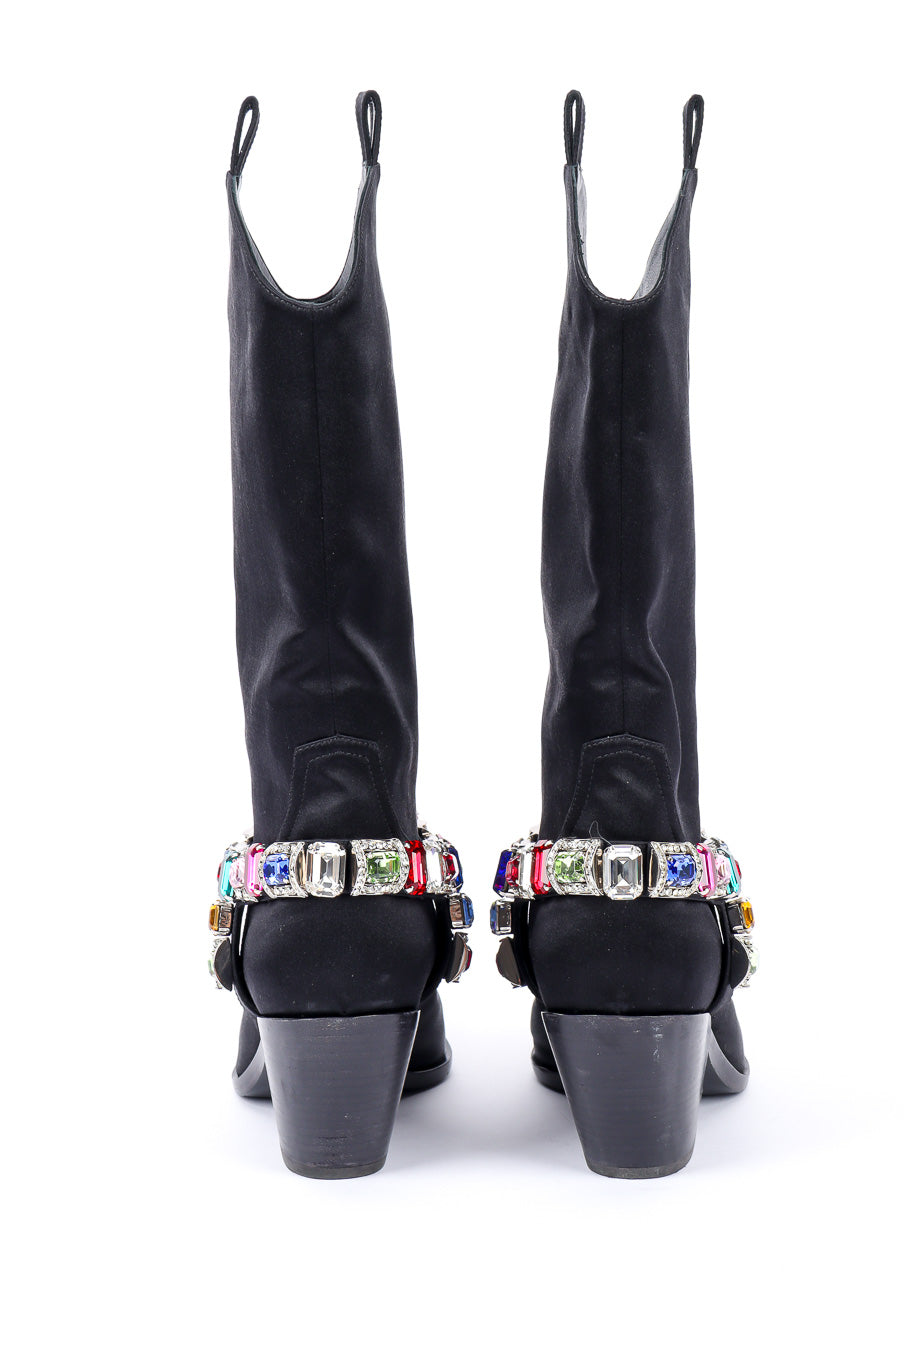 2018 F/W Bejeweled Satin Boots back view on white background @Recessla